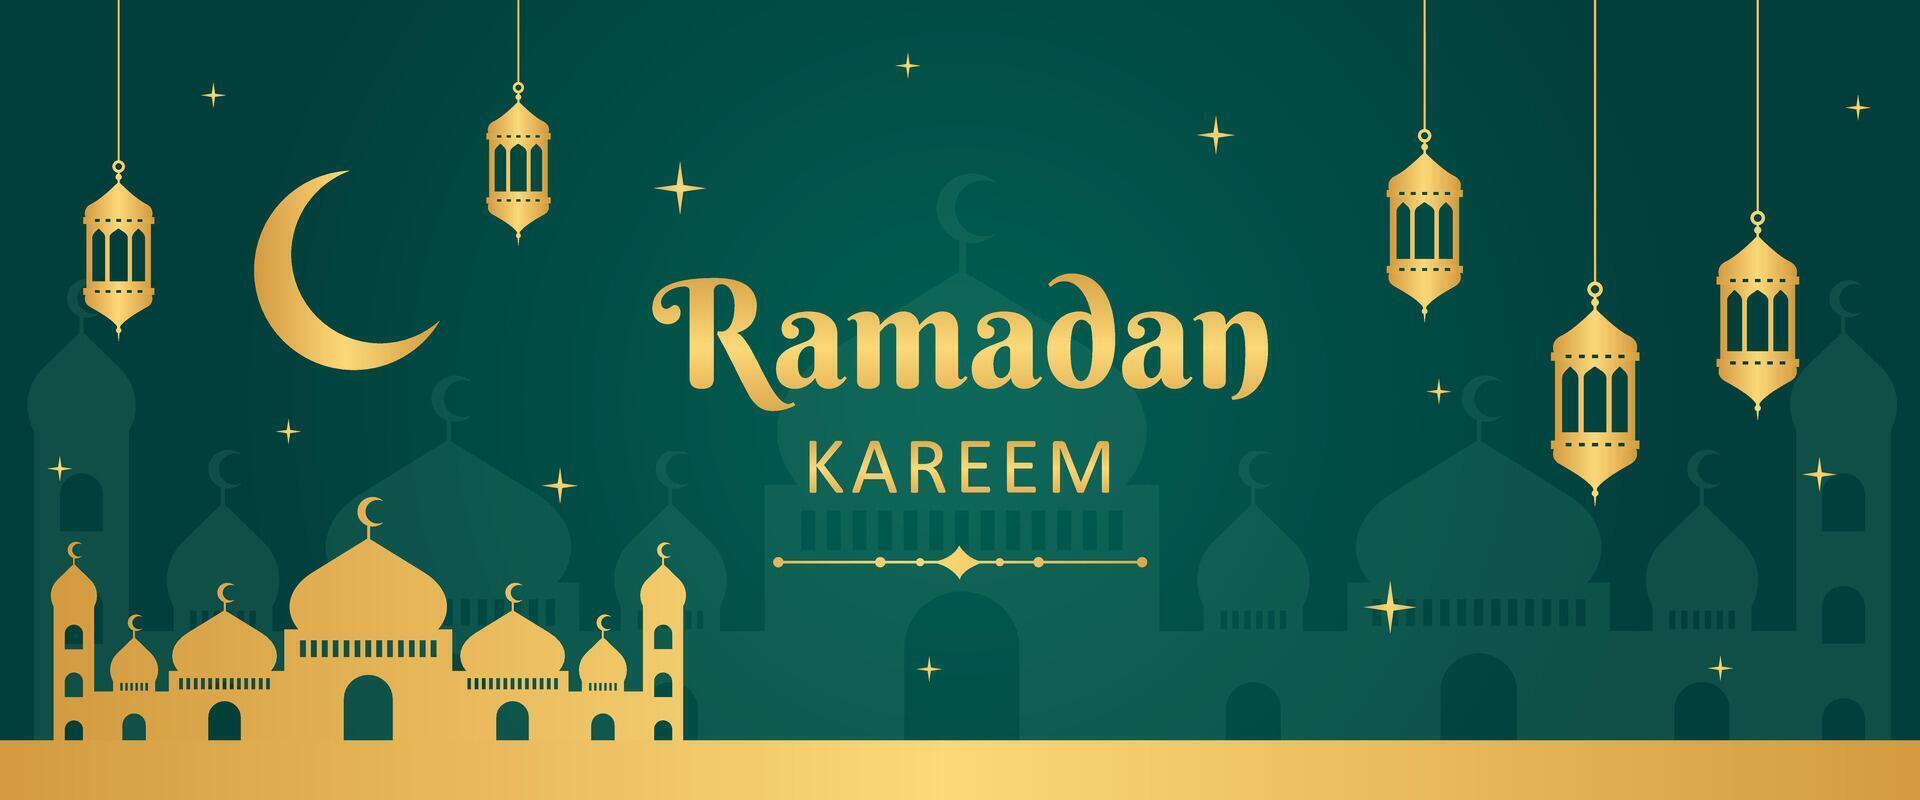 Ramadan Karem Islamic greetings banner background. Mosque, and lantern illustrations. Ramadan design for web banners, business, and header vector